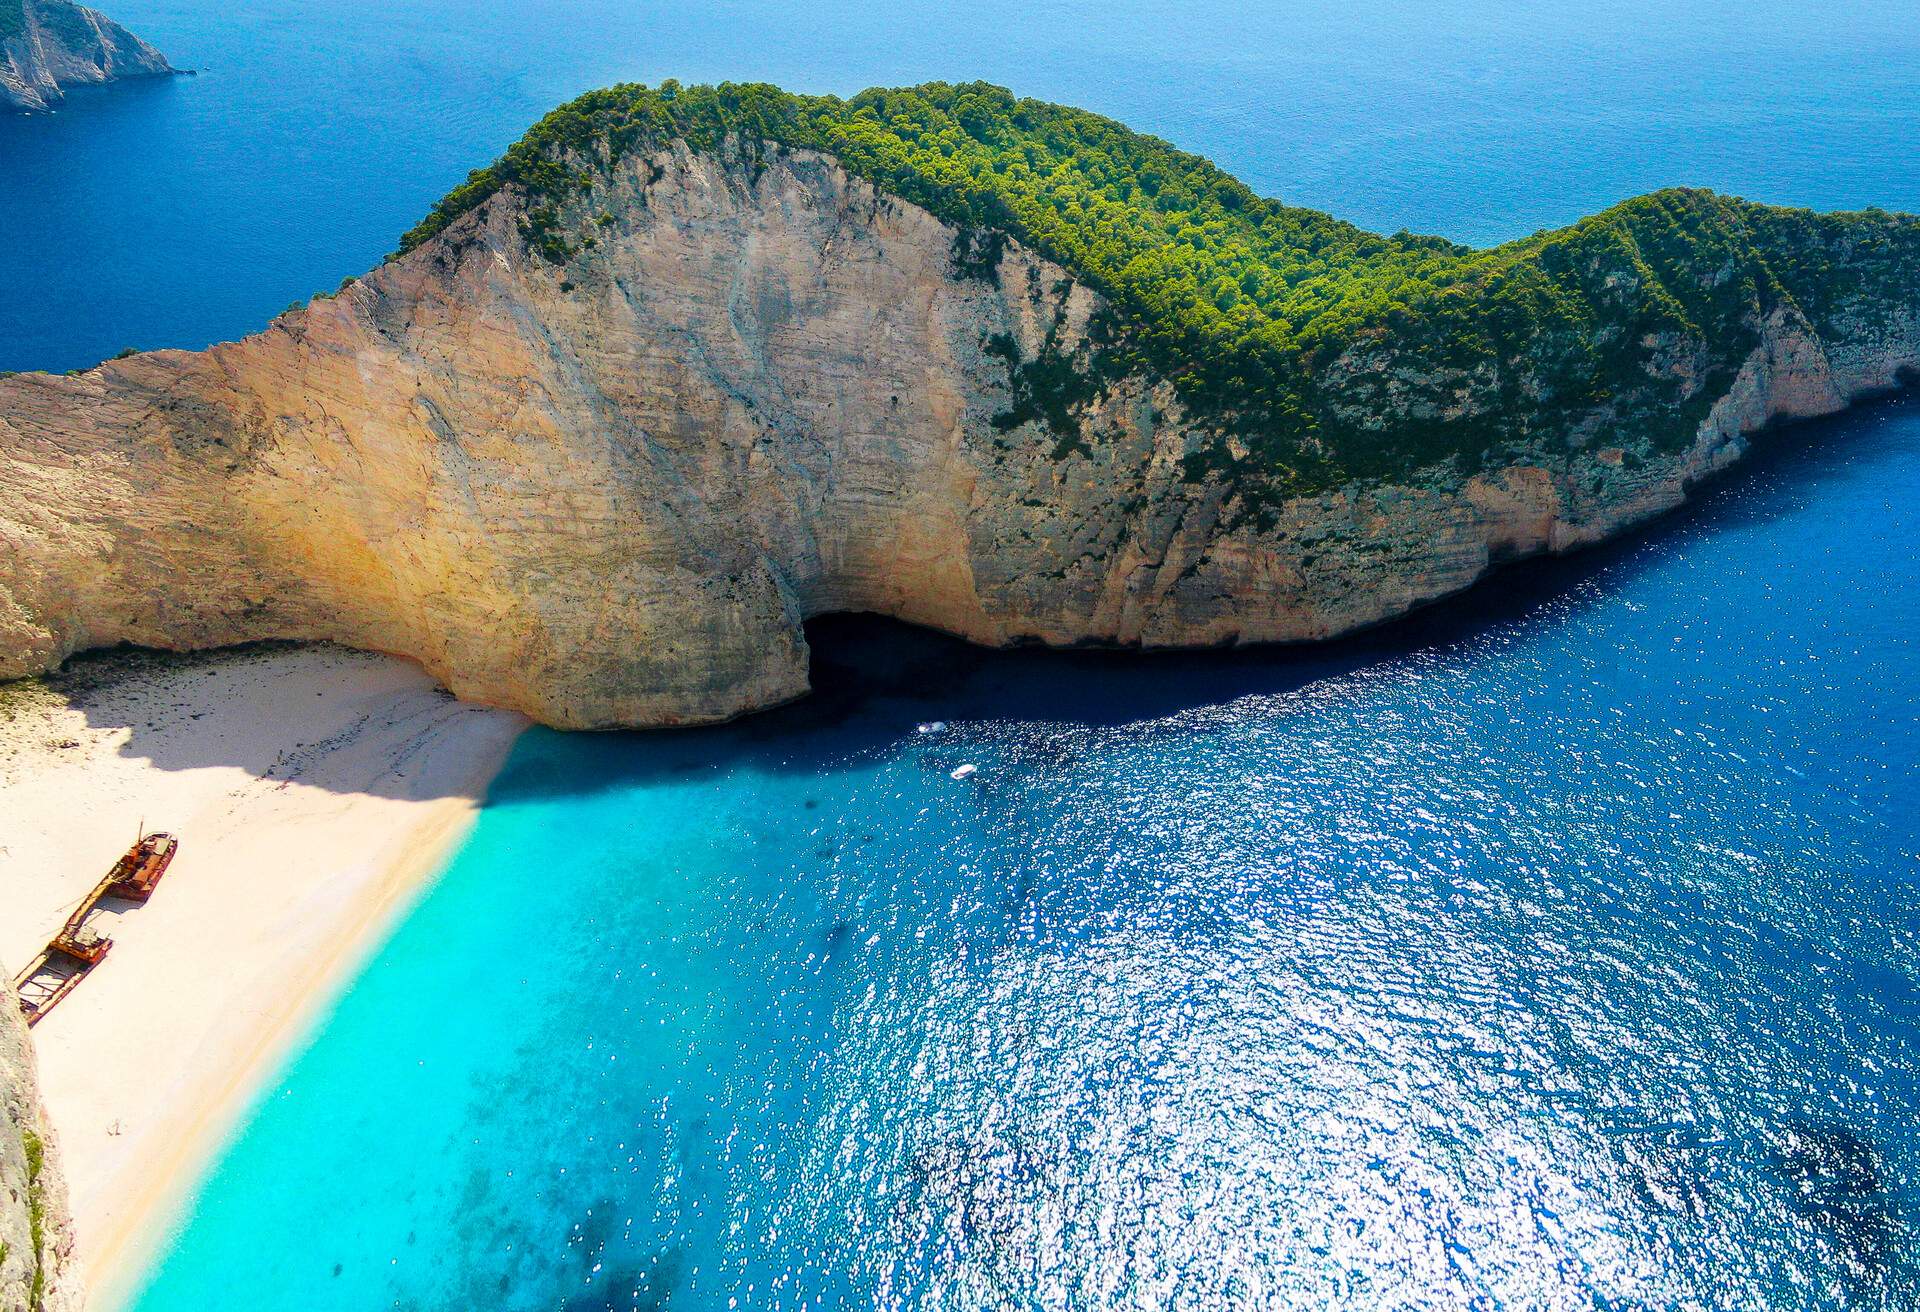 Also known as the Smugglers Cove and Navagio beach. This is one of the most photographed beaches in Europe..There's a small bridge that is built out over the Cliff to get this view.